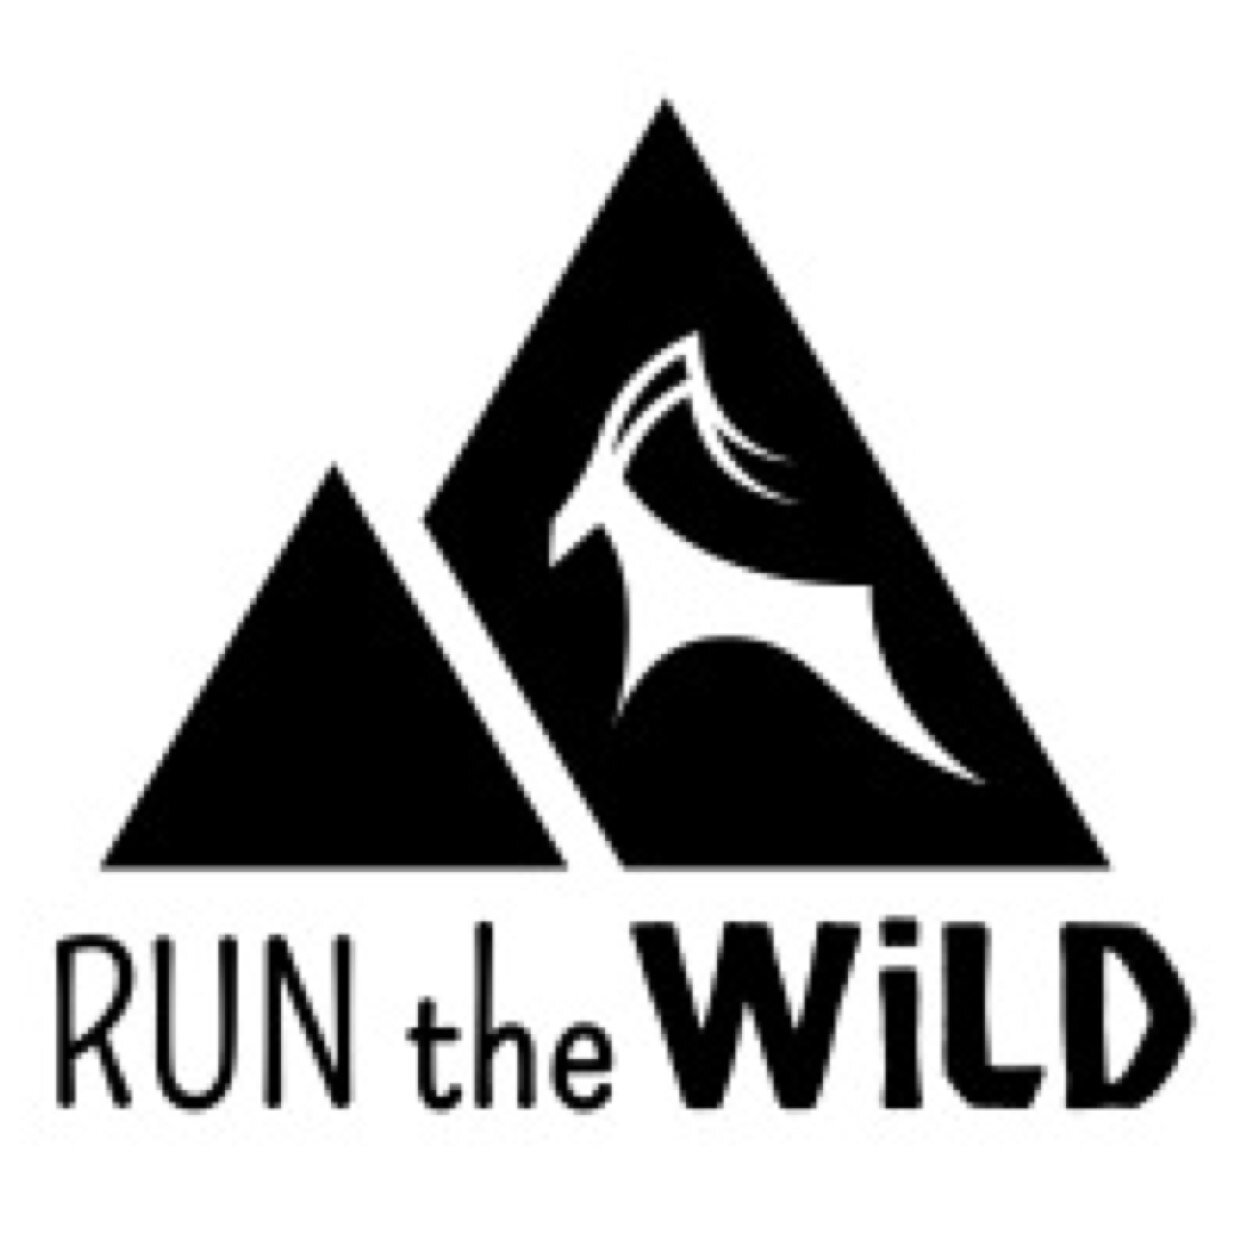 Exploring places... not running races. Europe’s leading dedicated trail running holiday specialist! Operating in the UK & Europe #runthewild #runningadventures